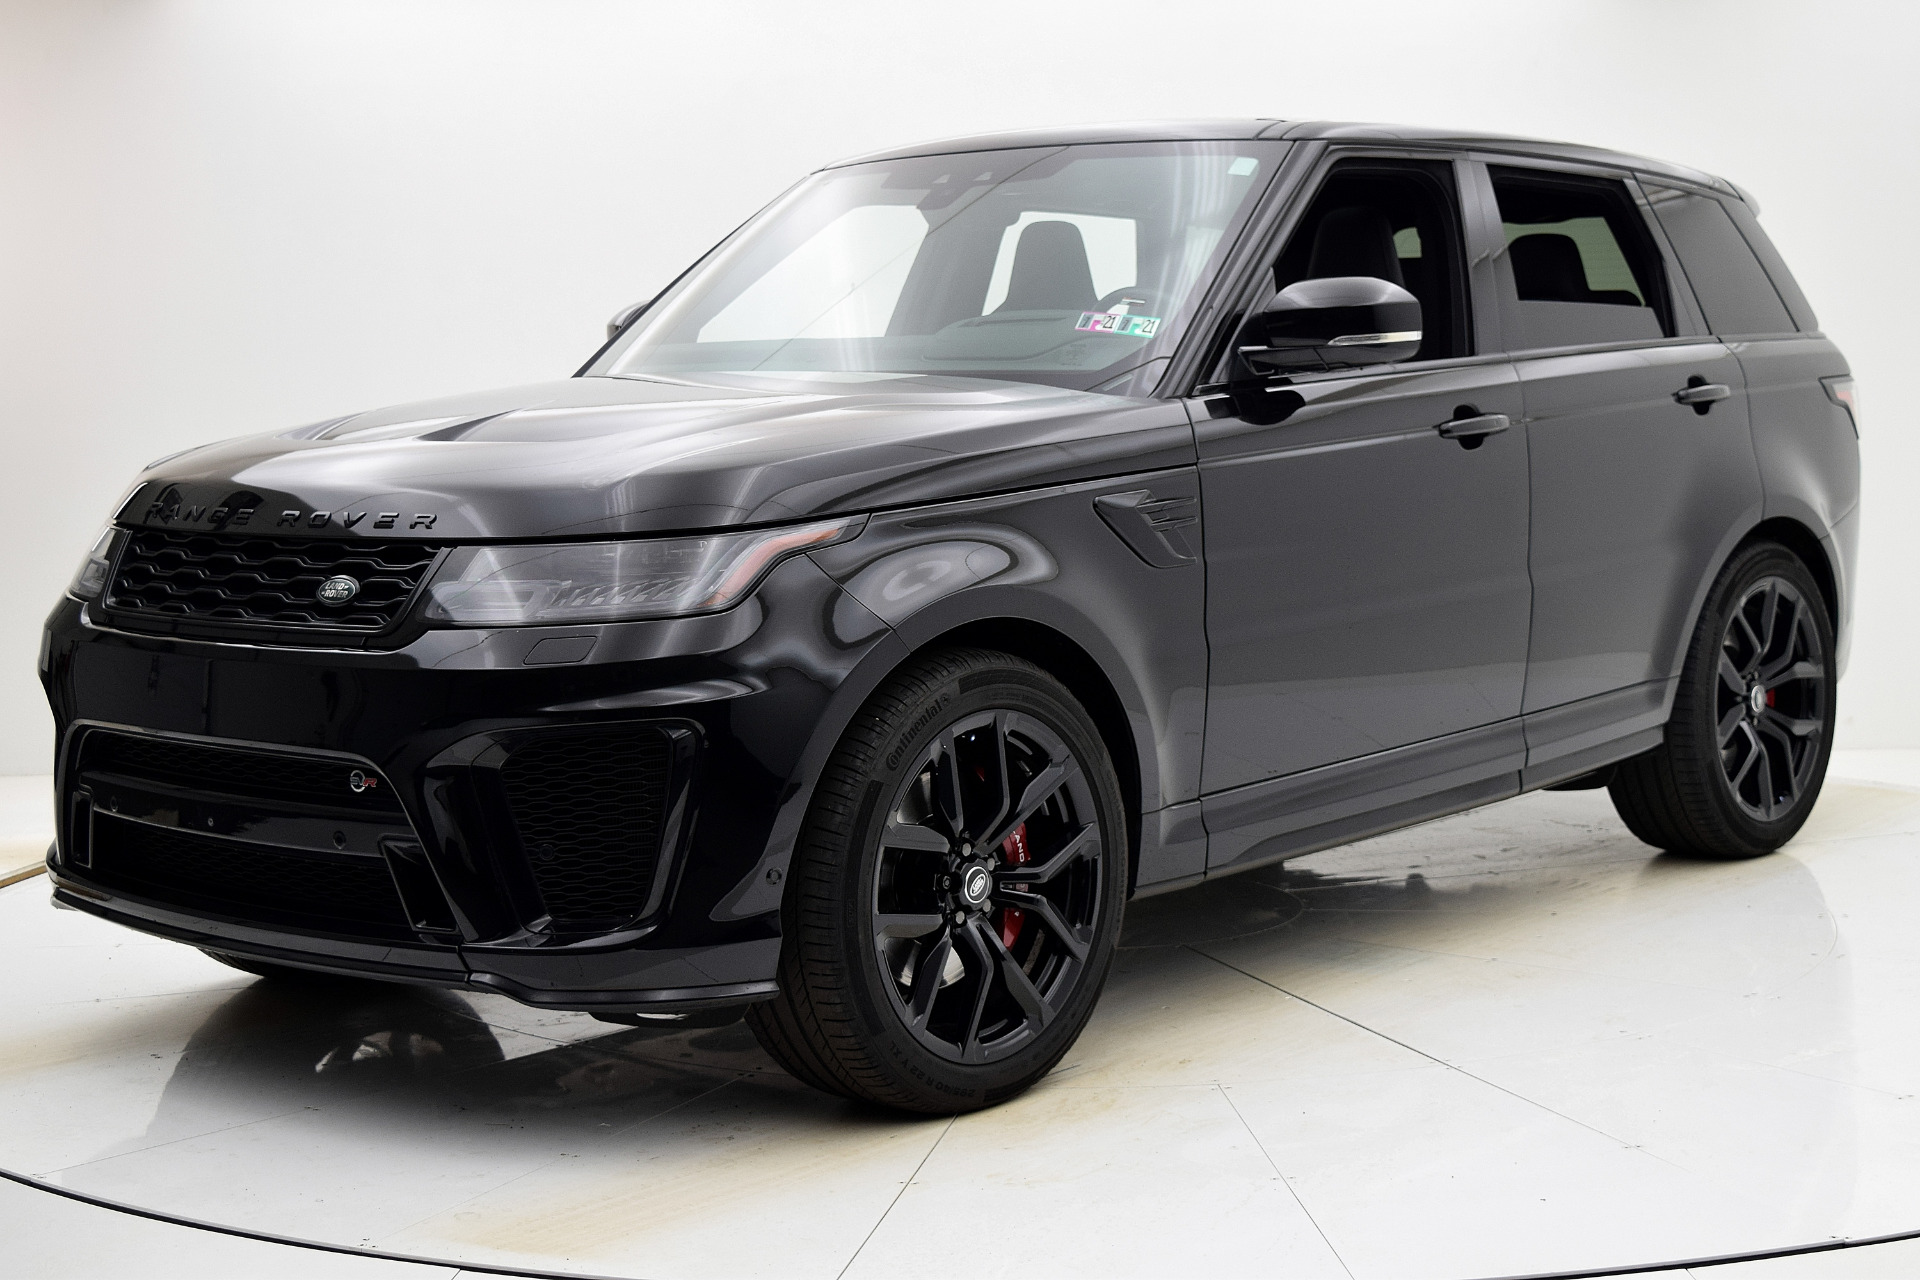 Used 2018 Land Rover Range Rover Sport SVR for sale Sold at Bentley Palmyra N.J. in Palmyra NJ 08065 2